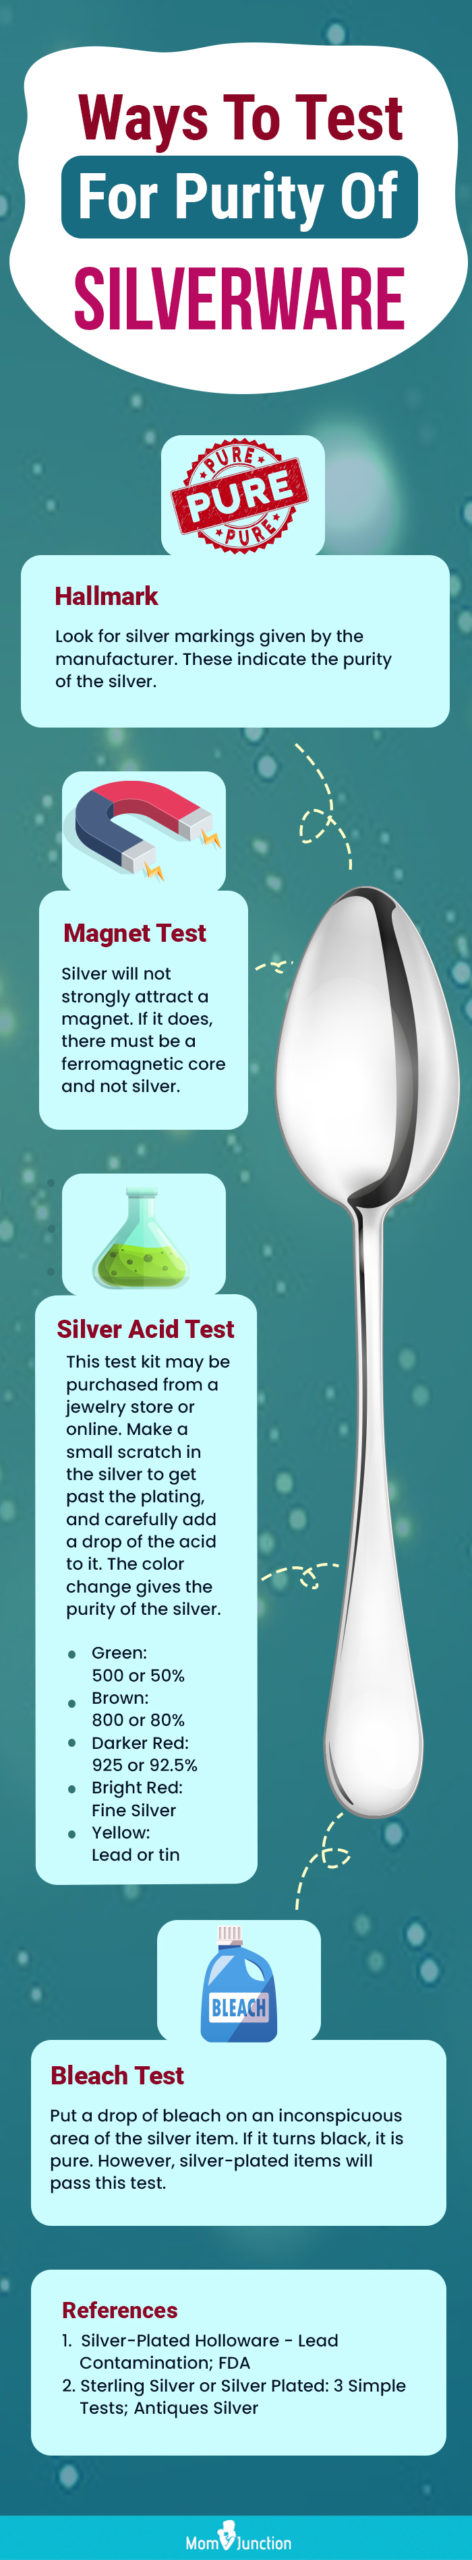 ways to test for purity of silverware (infographic)